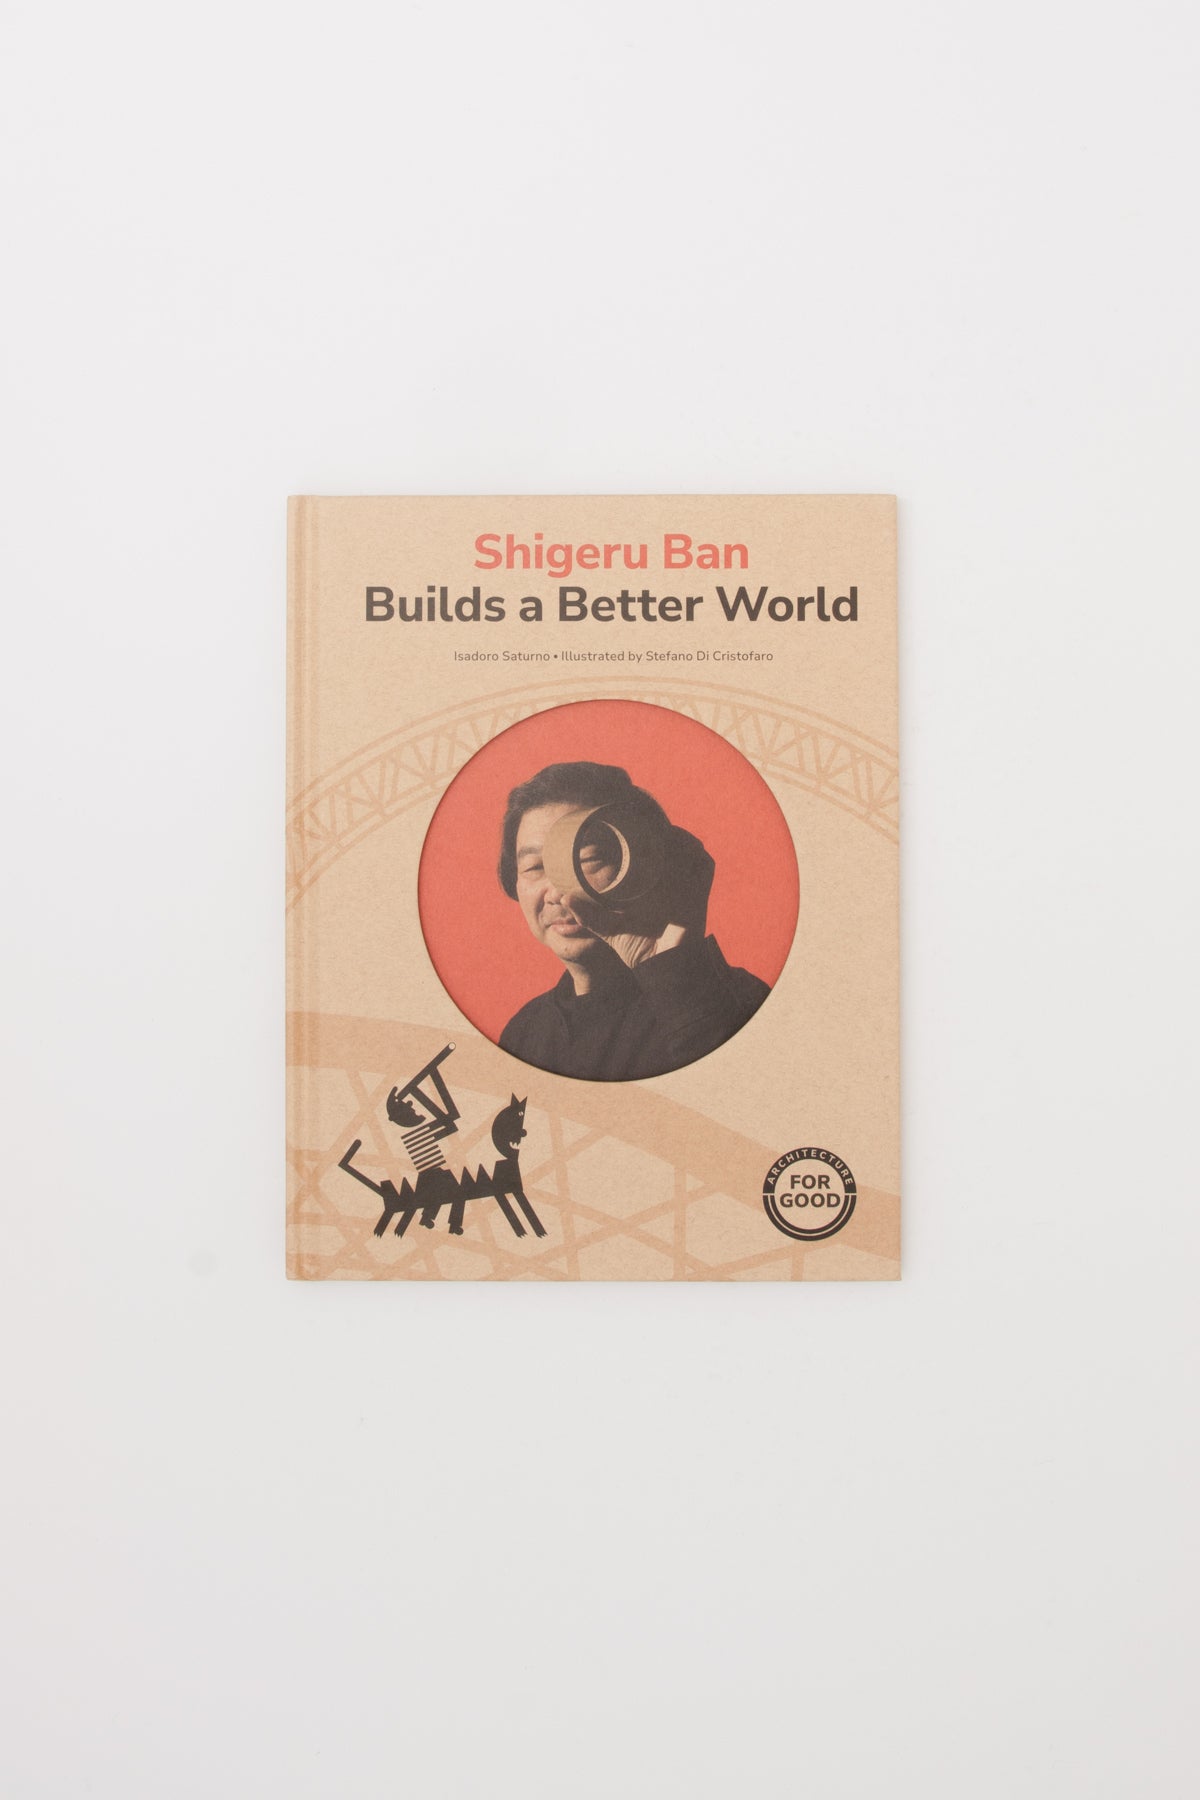 Shigeru Ban Builds A Better World (Architecture For Good) - Isadoro Saturno